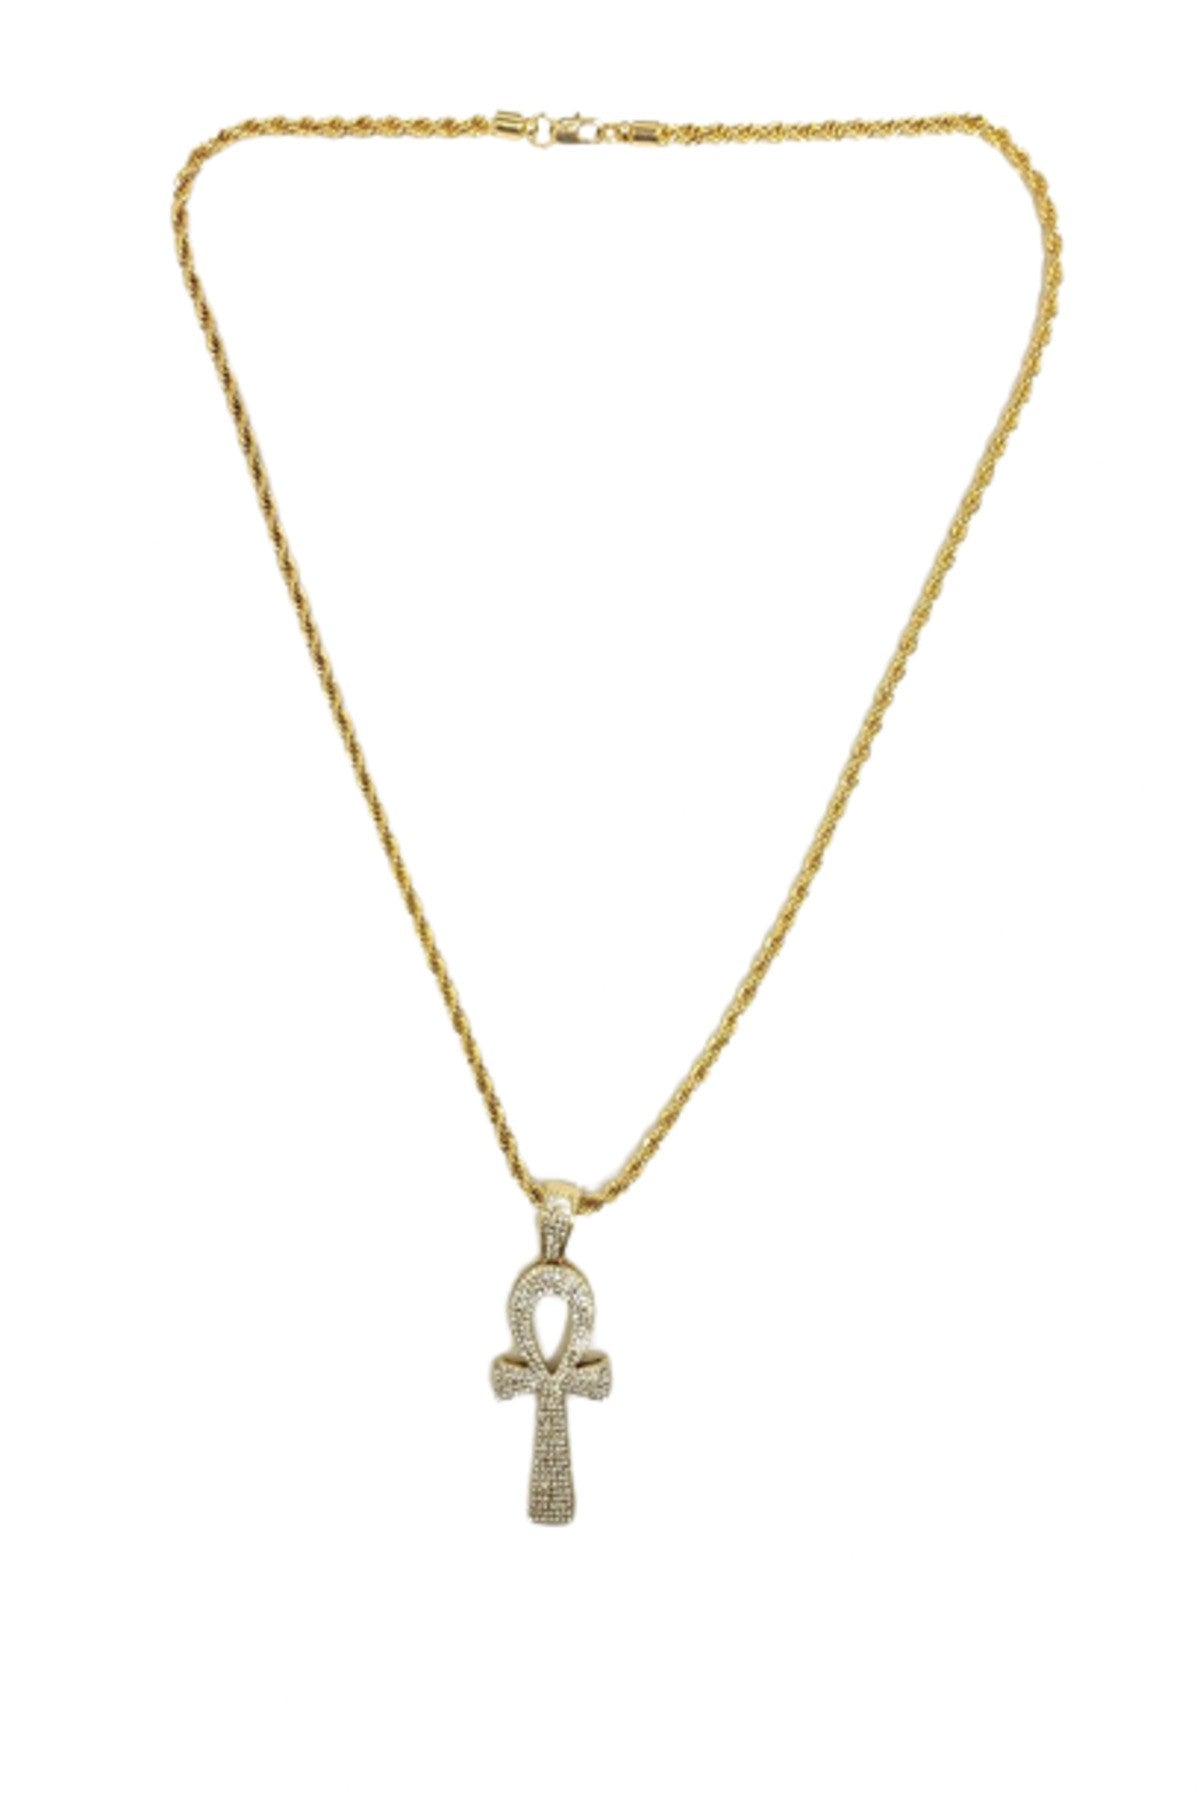 HIP HOP ICED OUT ANKH CROSS PENDANT CHAIN